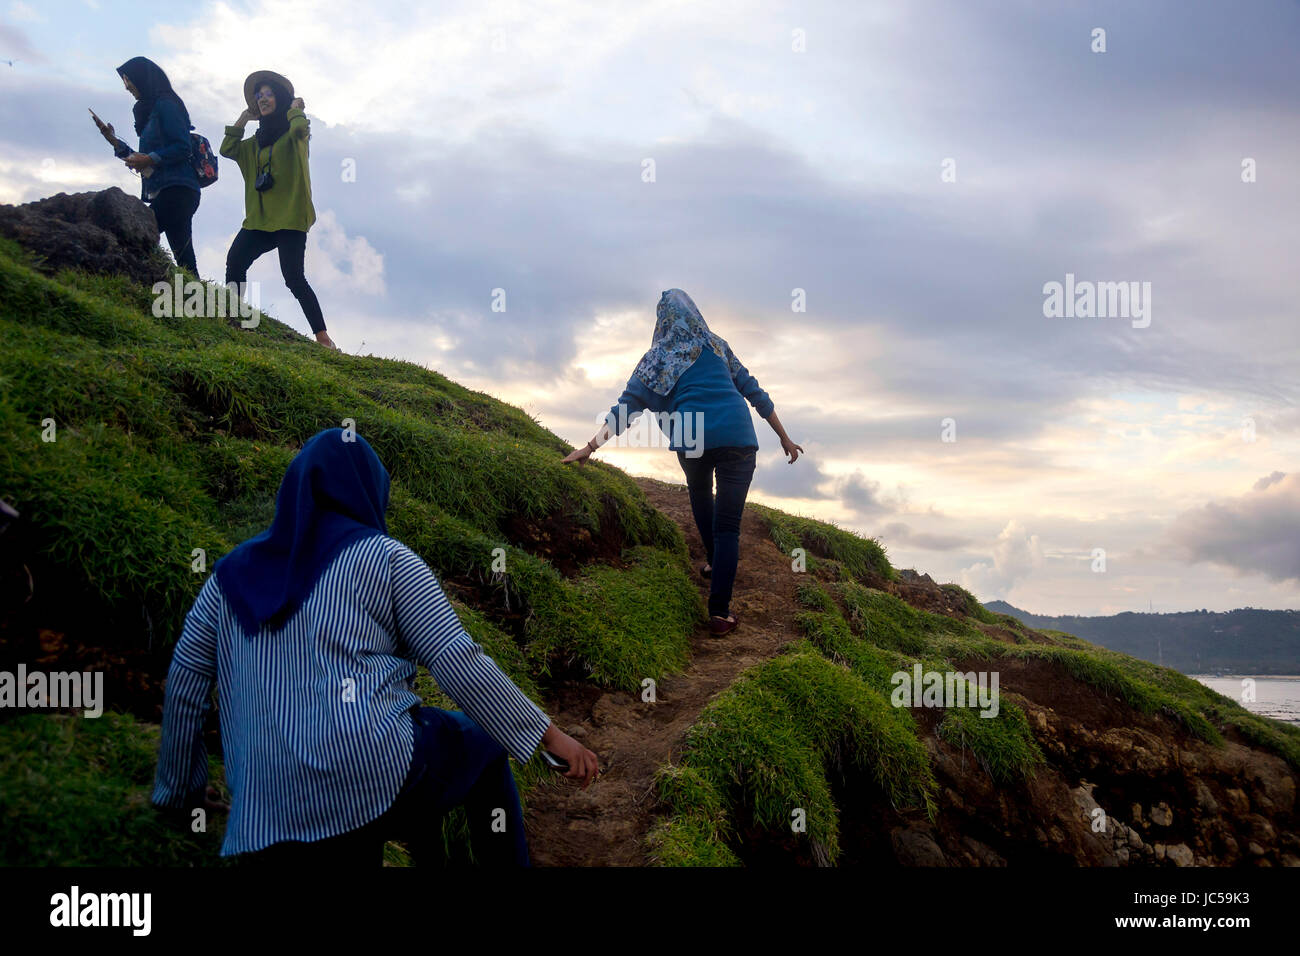 Women traveling on path up hill Stock Photo